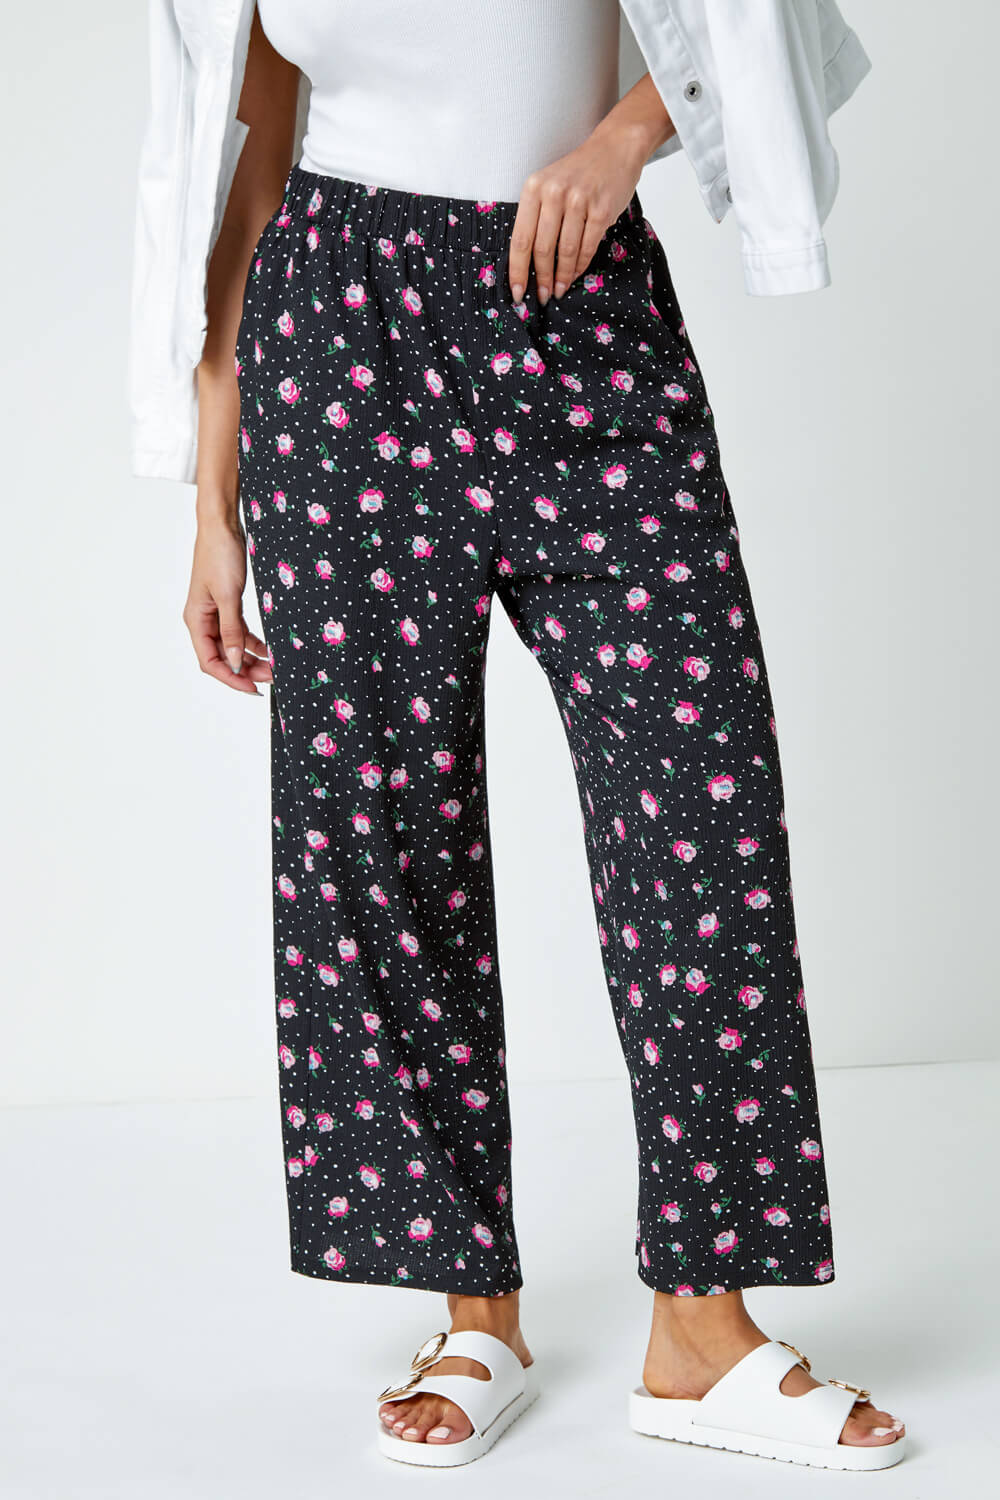 Black Ditsy Floral Print Stretch Culottes, Image 4 of 5